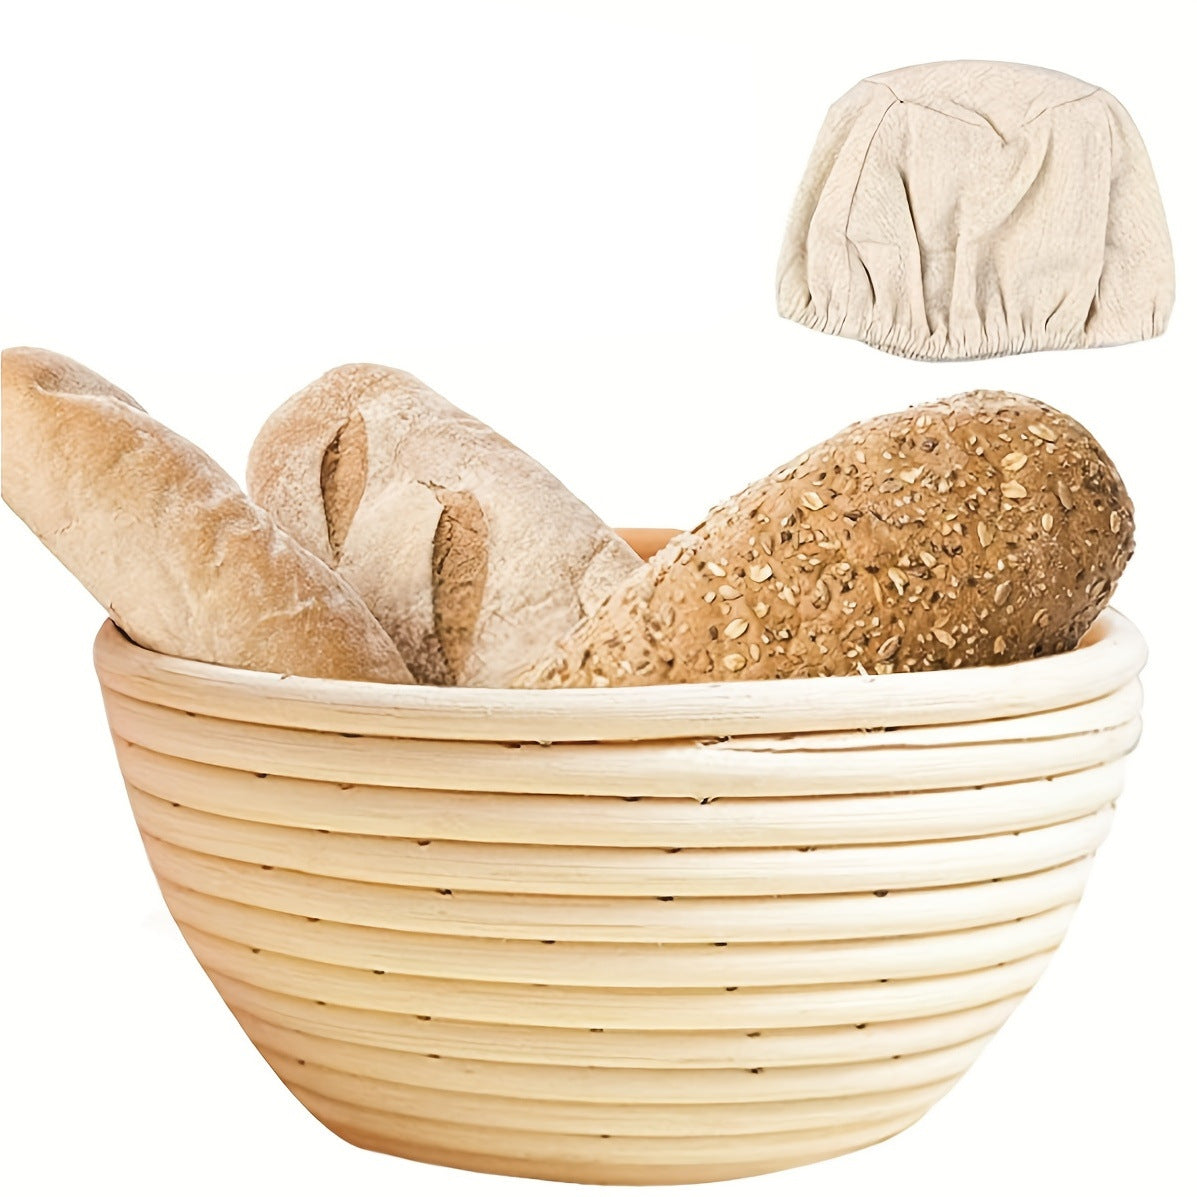 Oval Bowl for Proofing Bread  Banneton Bread Making Tools